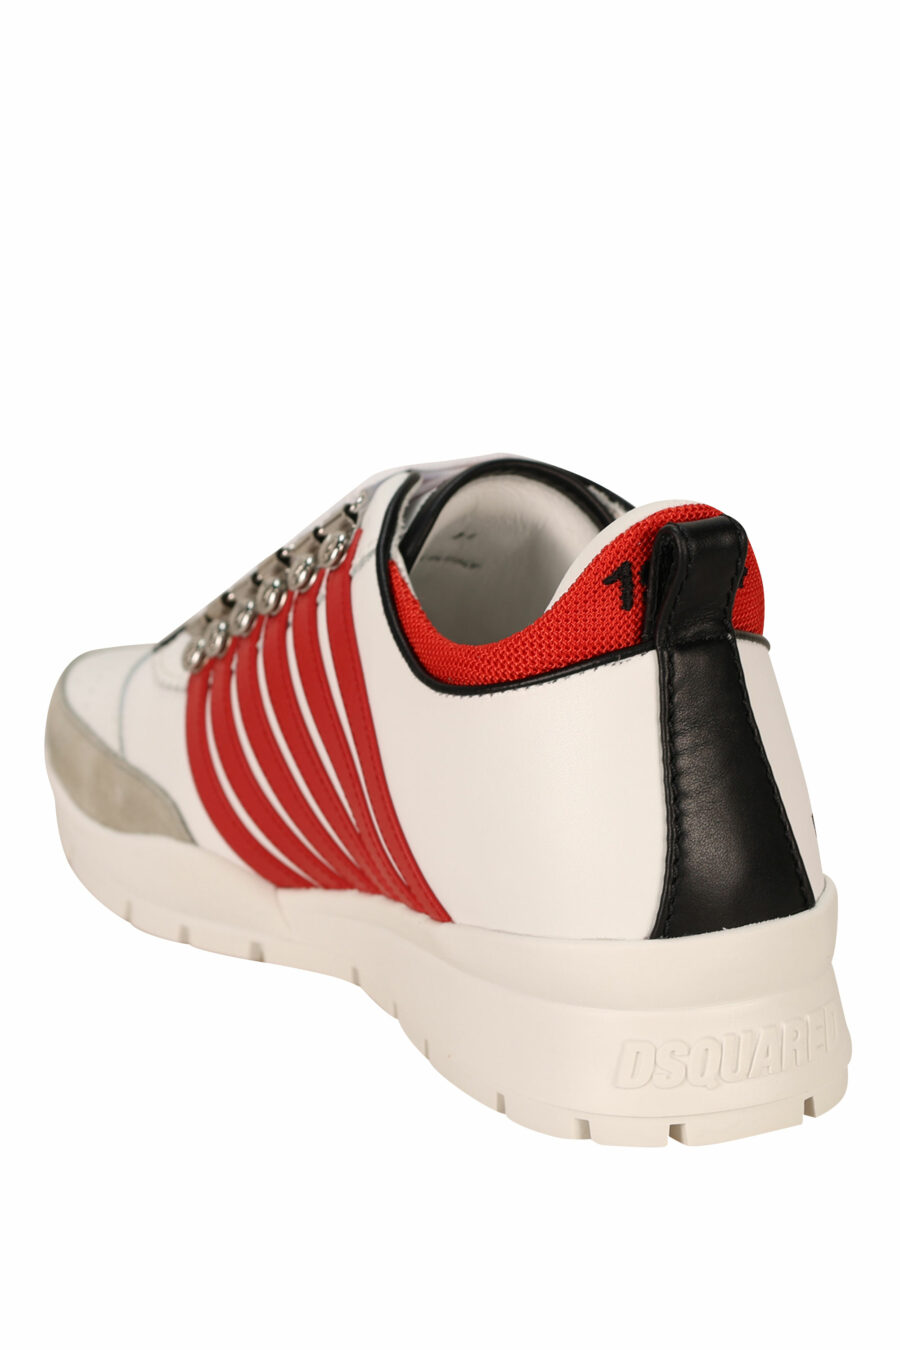 White trainers with red lines and white sole - 8055777300985 3